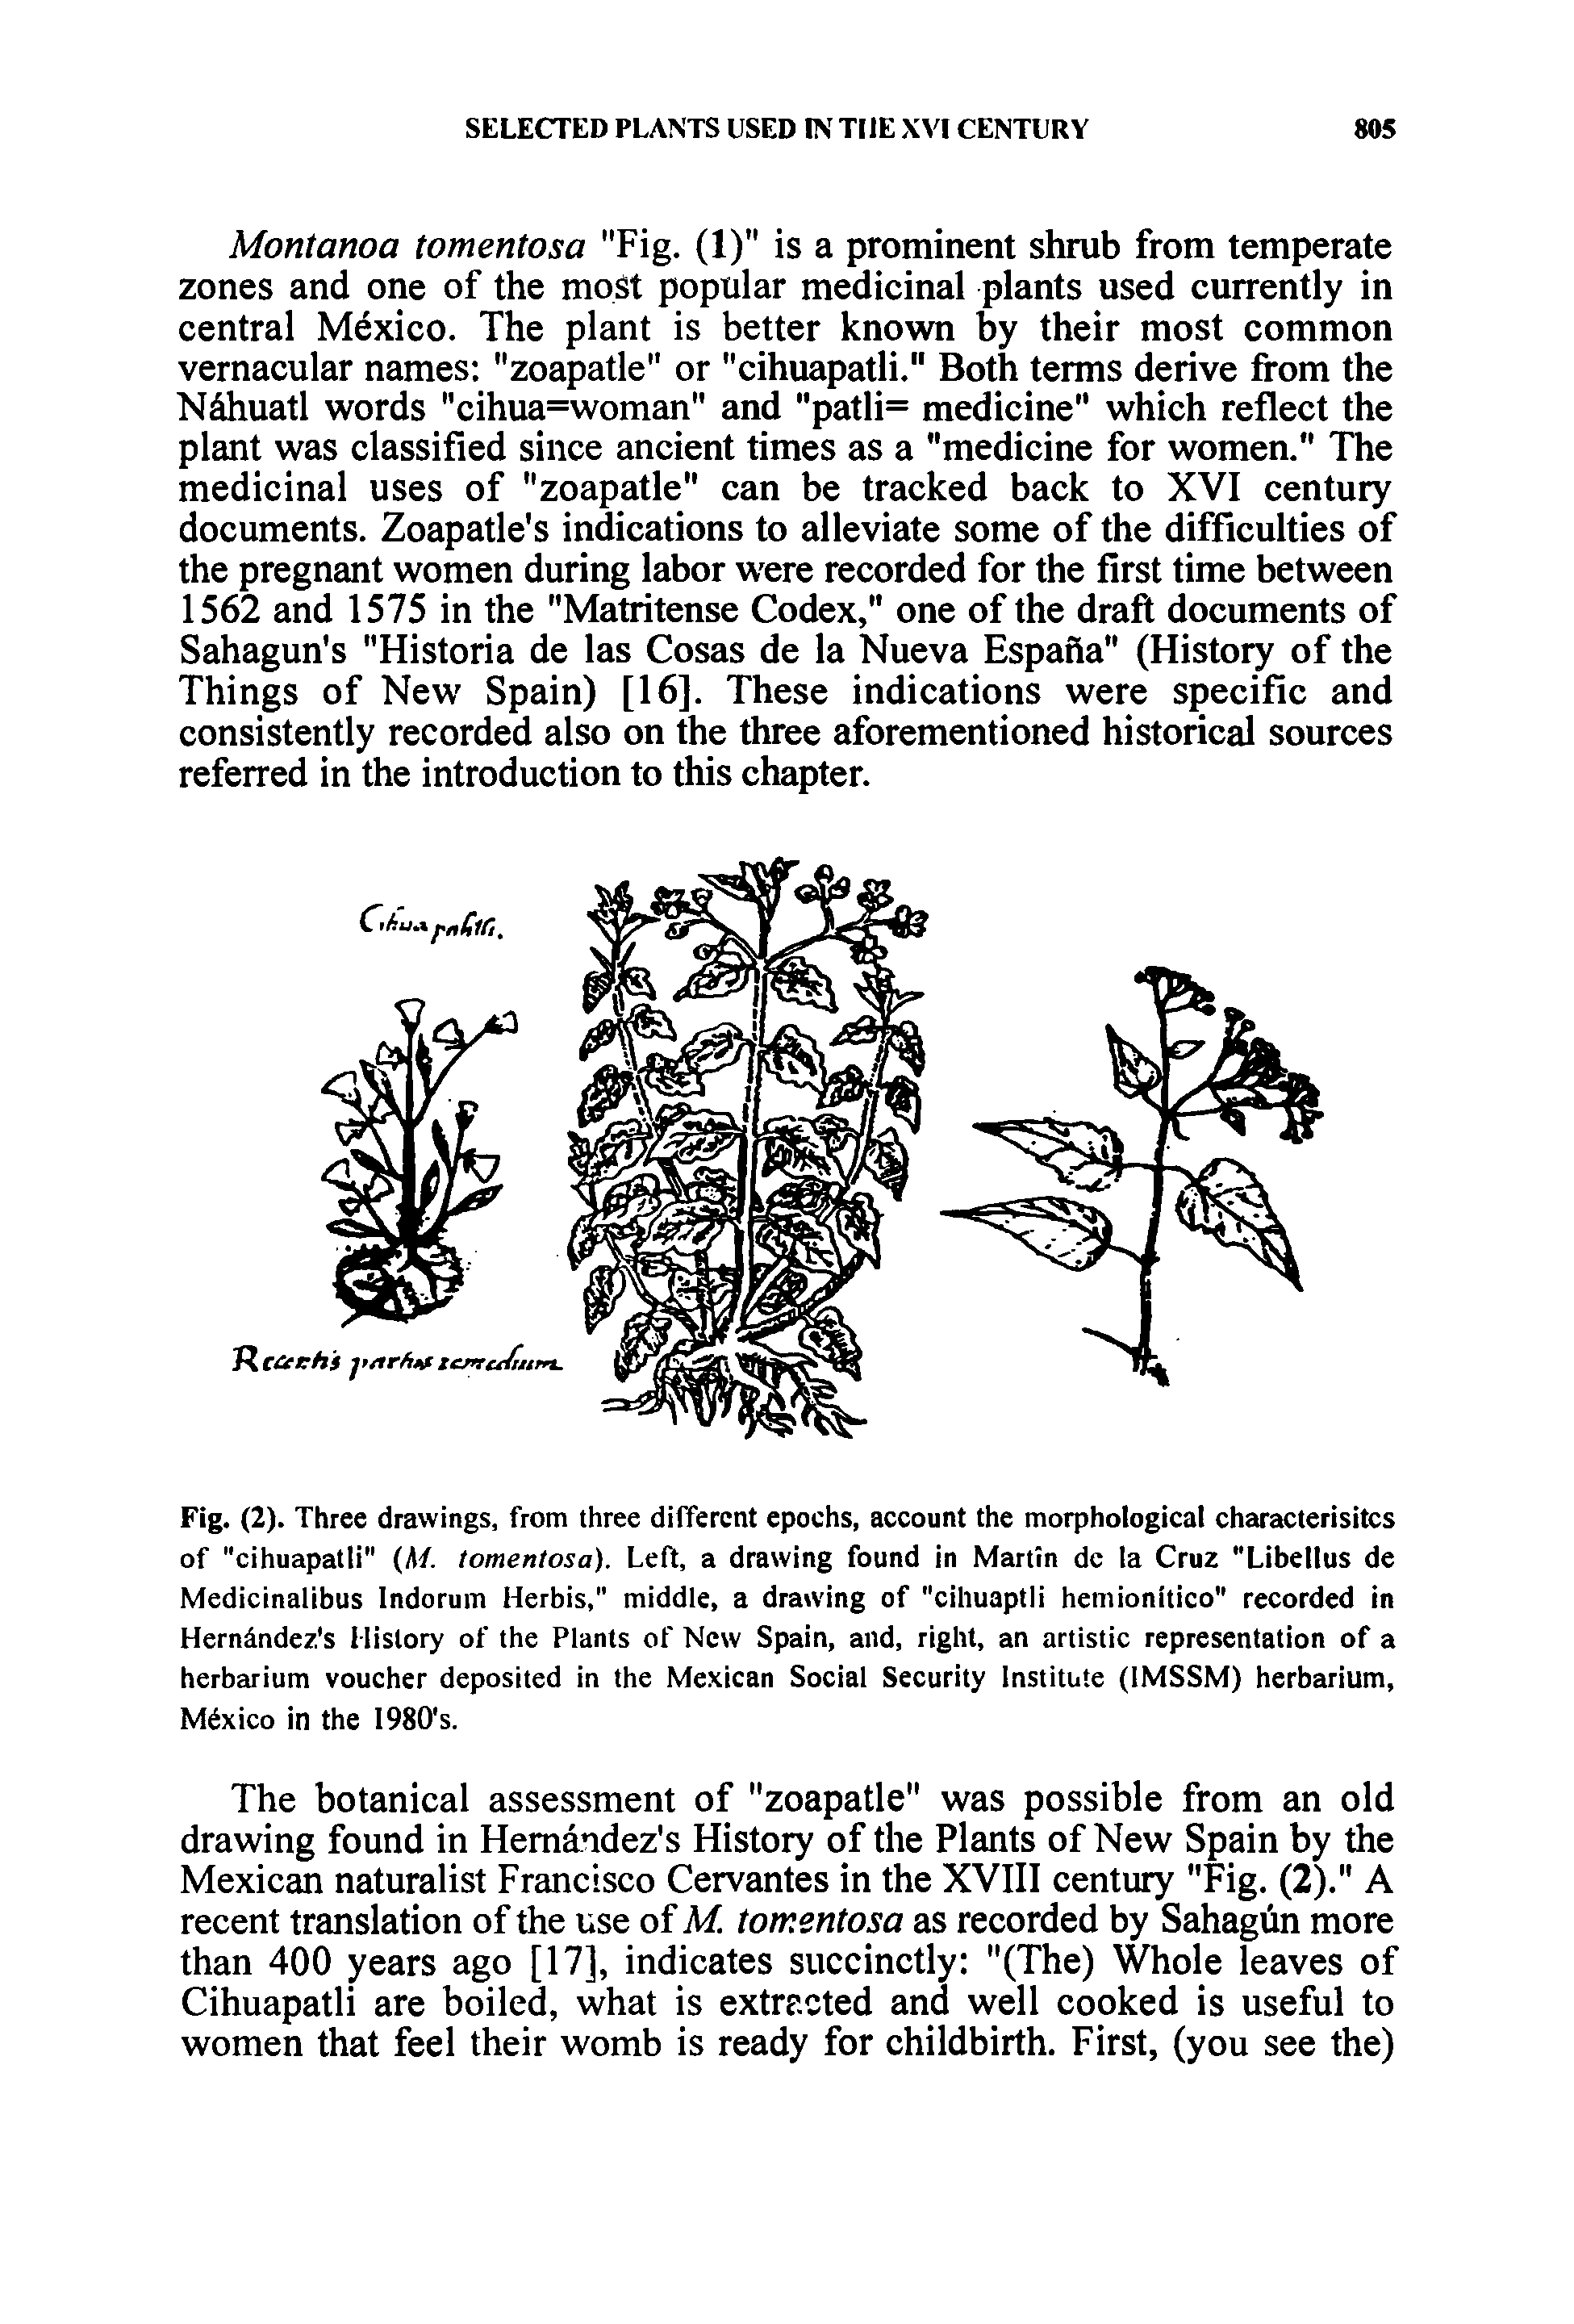 Fig. (2). Three drawings, from three different epochs, account the morphological cheu acterisites of "cihuapatli" (A/, tomentosa). Left, a drawing found in Martin dc la Cruz "Libellus de Medicinalibus Indorum Herbis," middle, a drawing of "ciliuaptli hemionitico" recorded in Herndndez s History of the Plants of New Spain, and, right, an artistic representation of a herbarium voucher deposited in the Mexican Social Security Institute (IMSSM) herbarium, Mexico in the 1980 s.